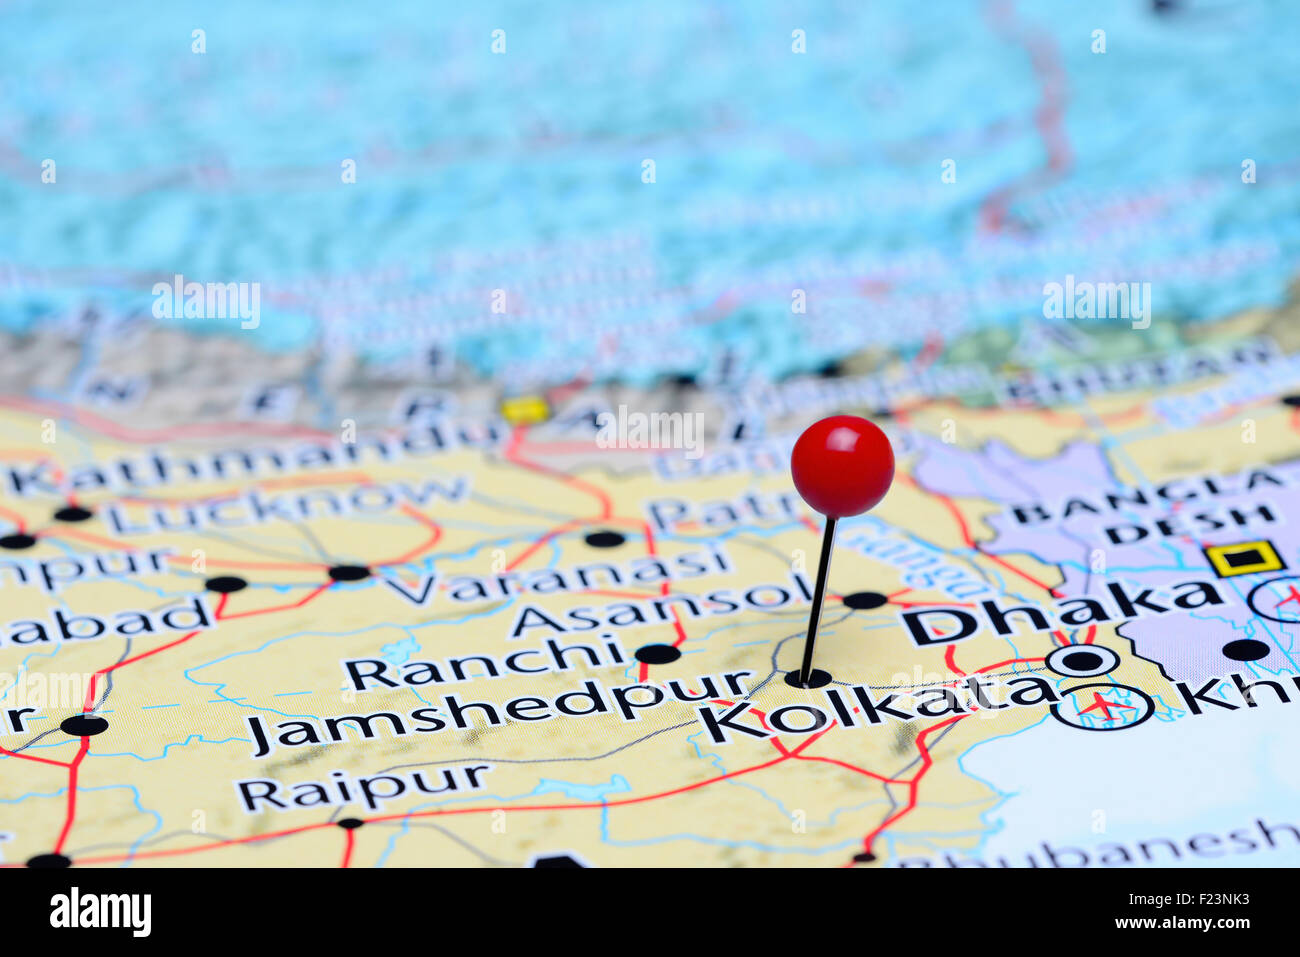 Jamshedpur pinned on a map of Asia Stock Photo